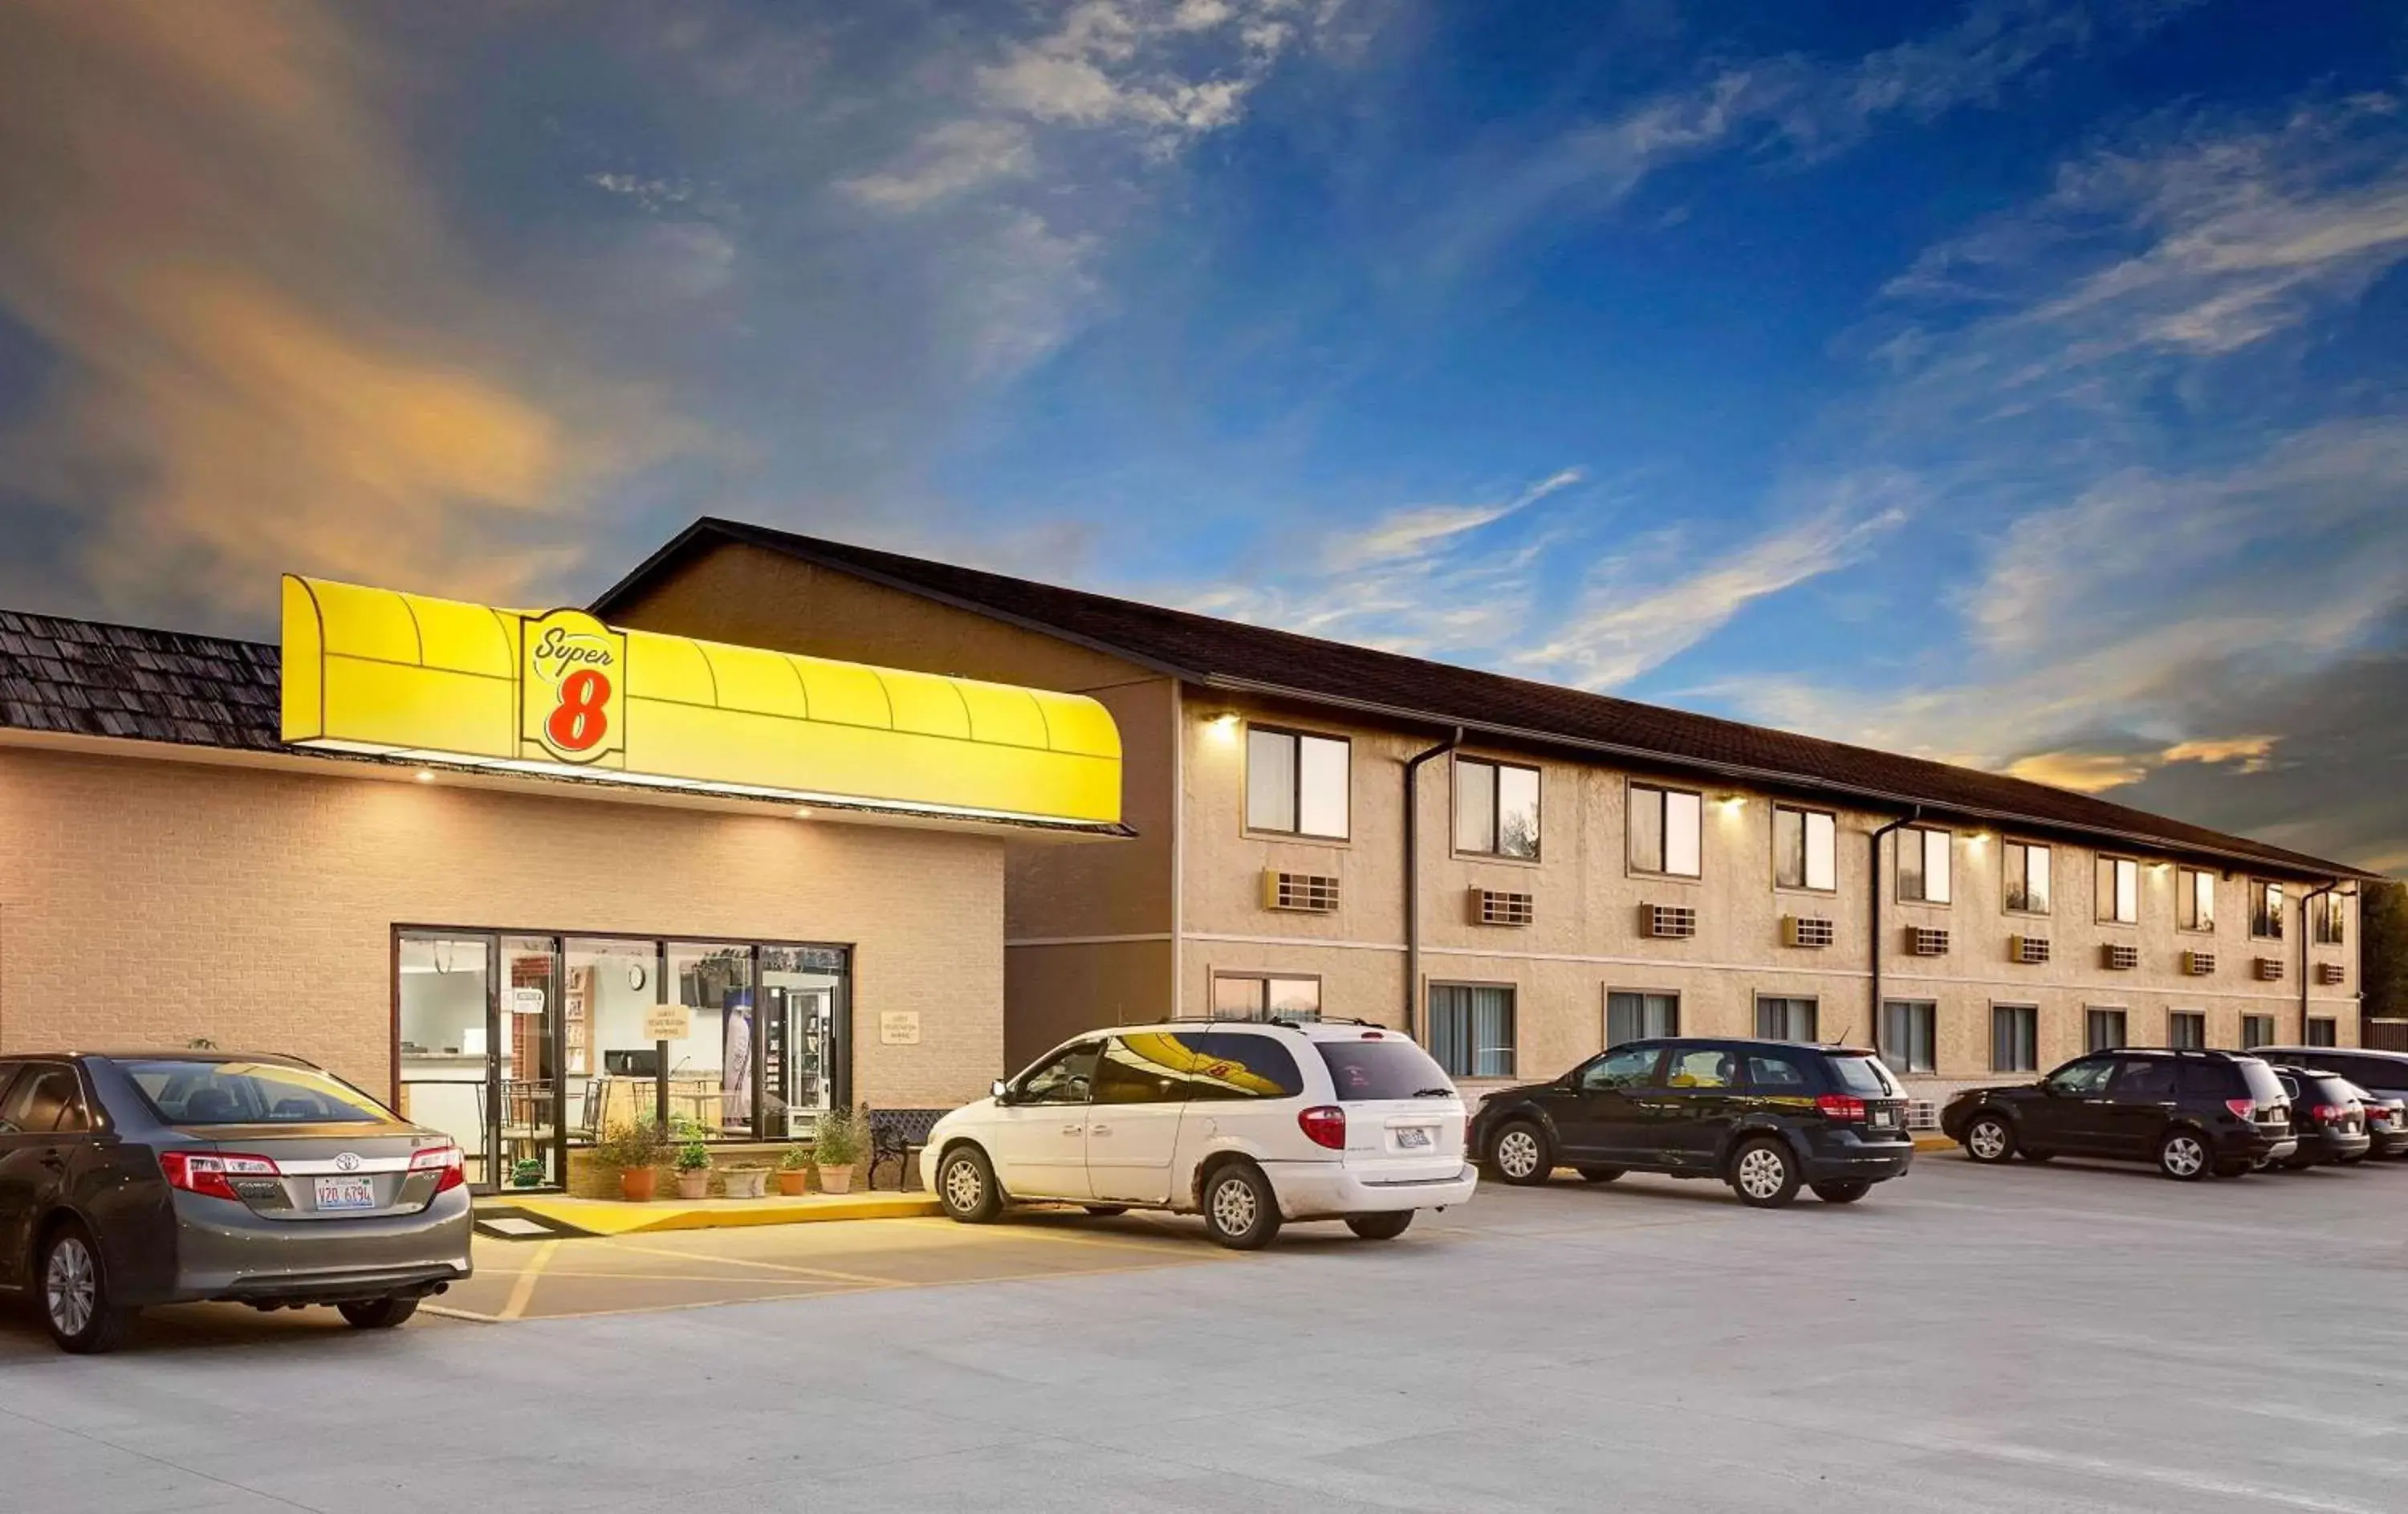 Property Building in Super 8 by Wyndham Macomb